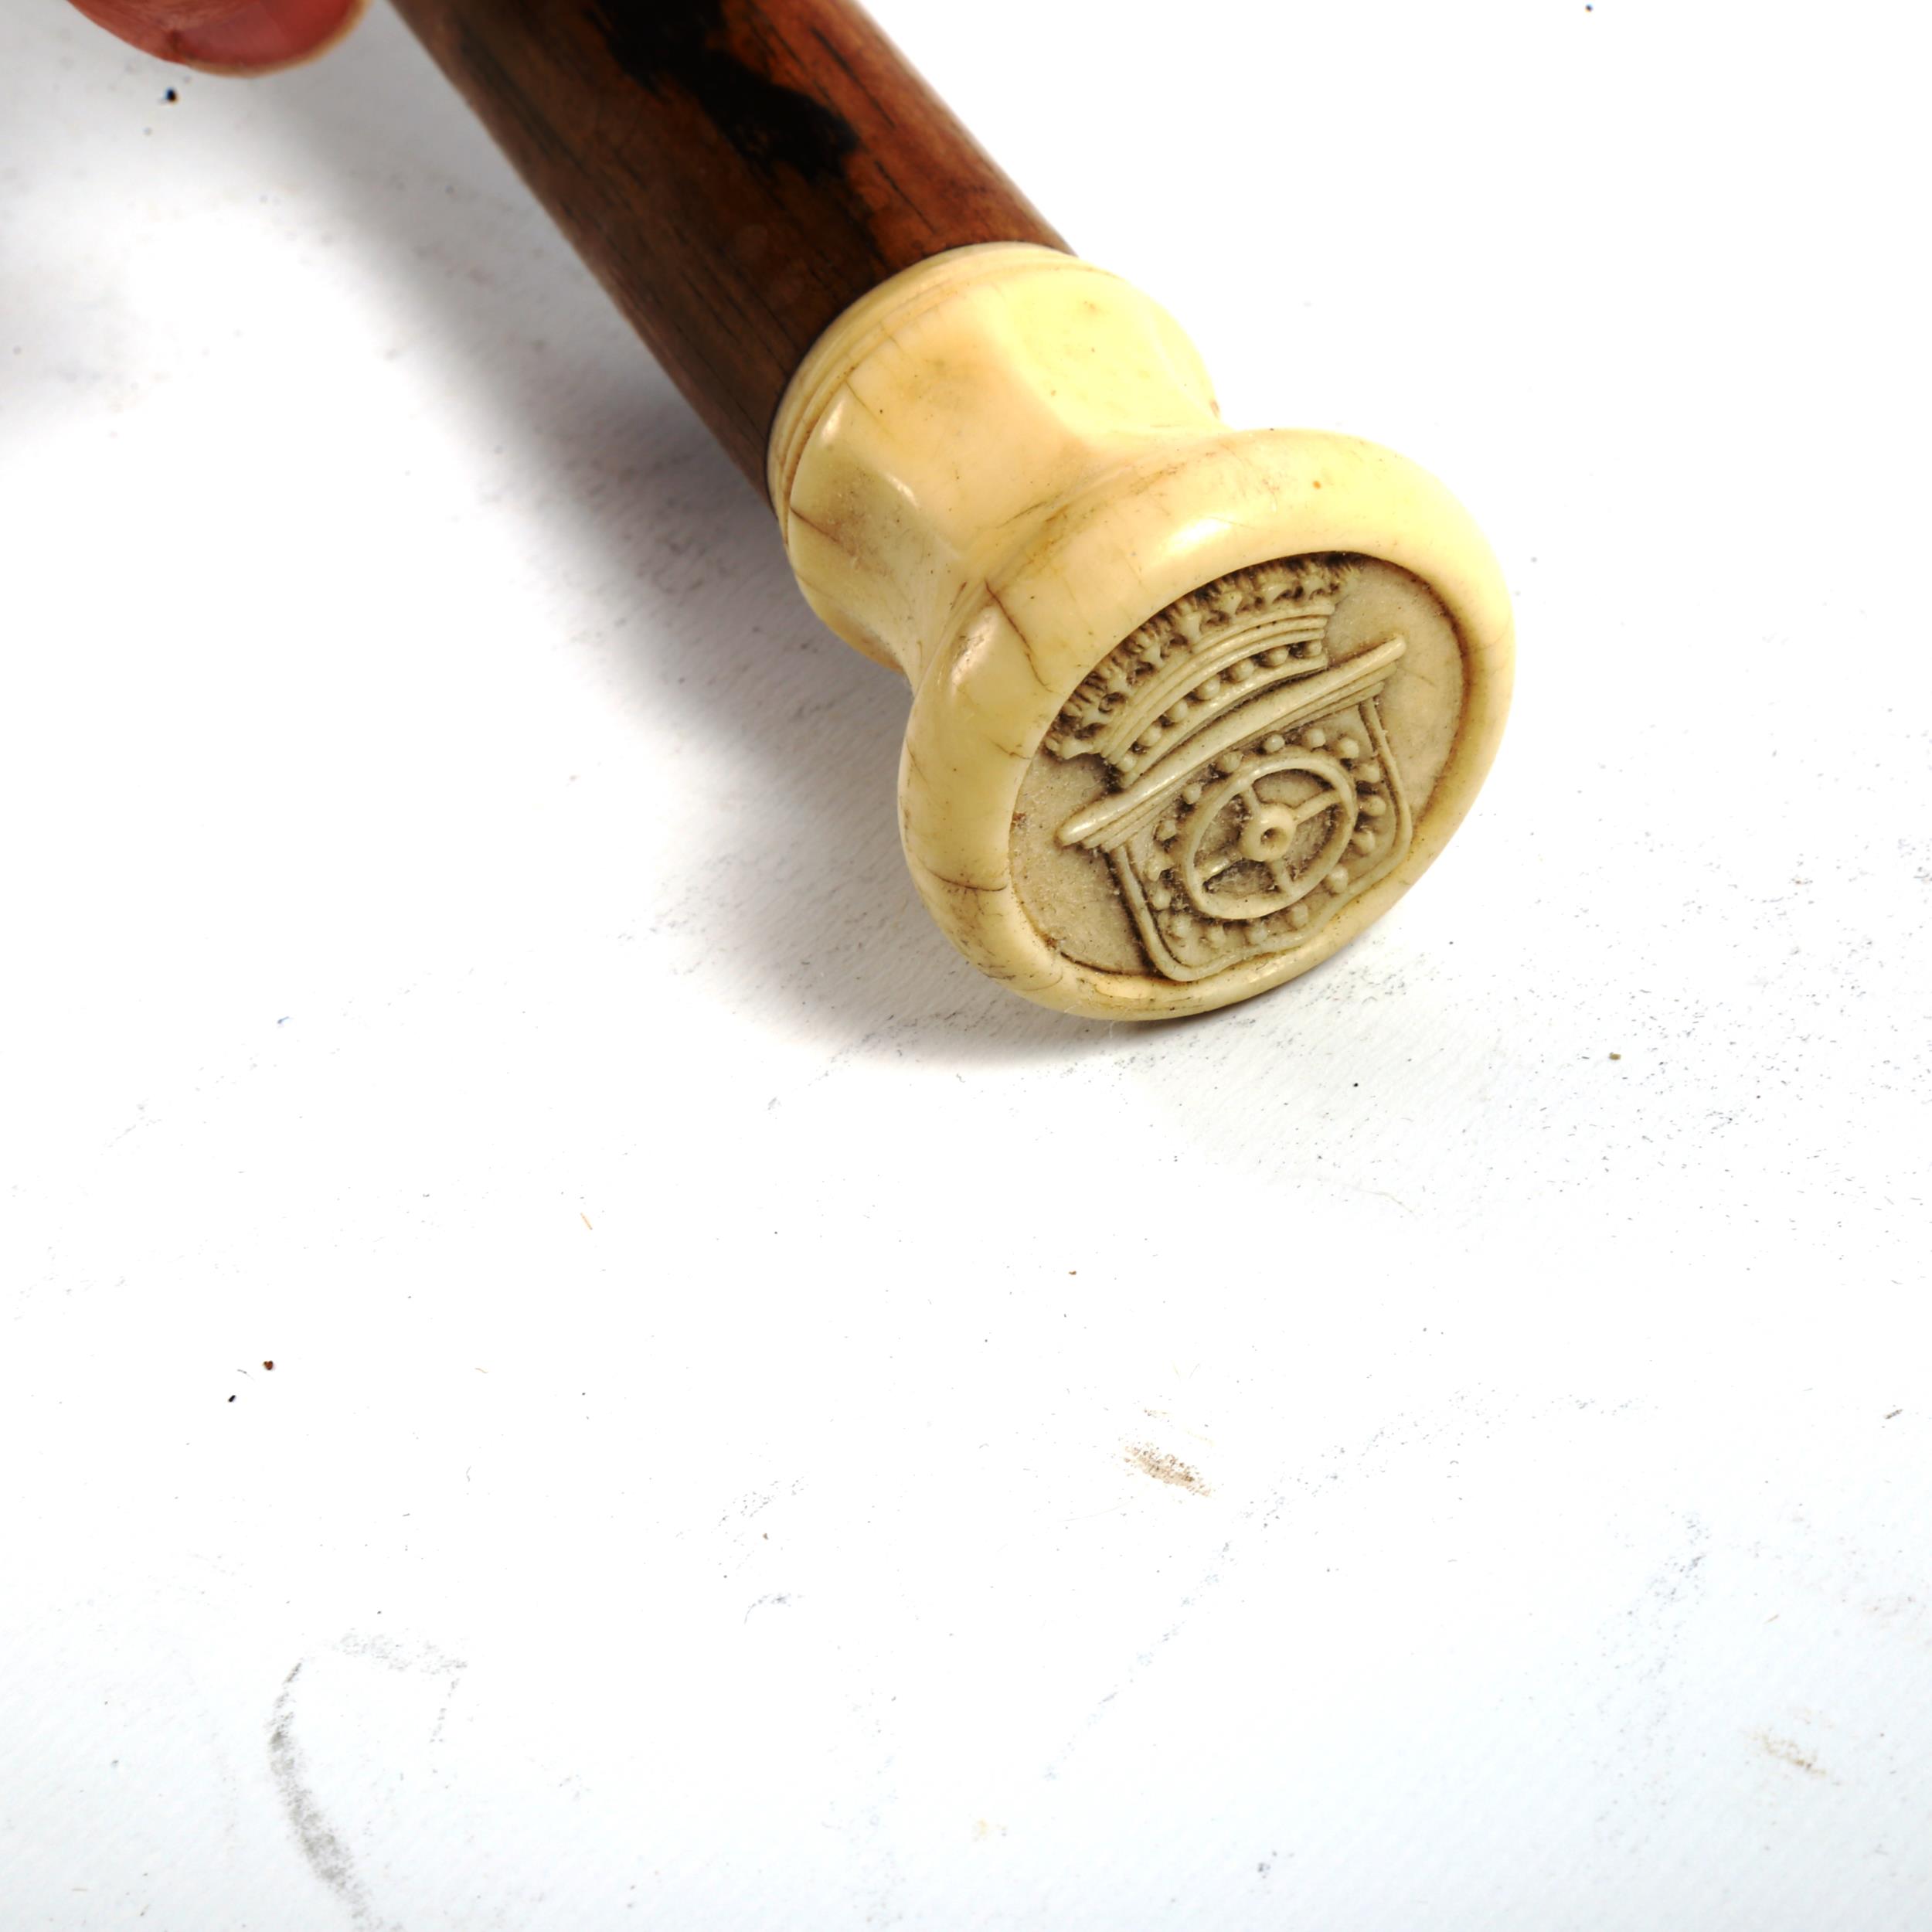 An 18th/19th century ivory-handled walking cane, with seal top - Image 4 of 5